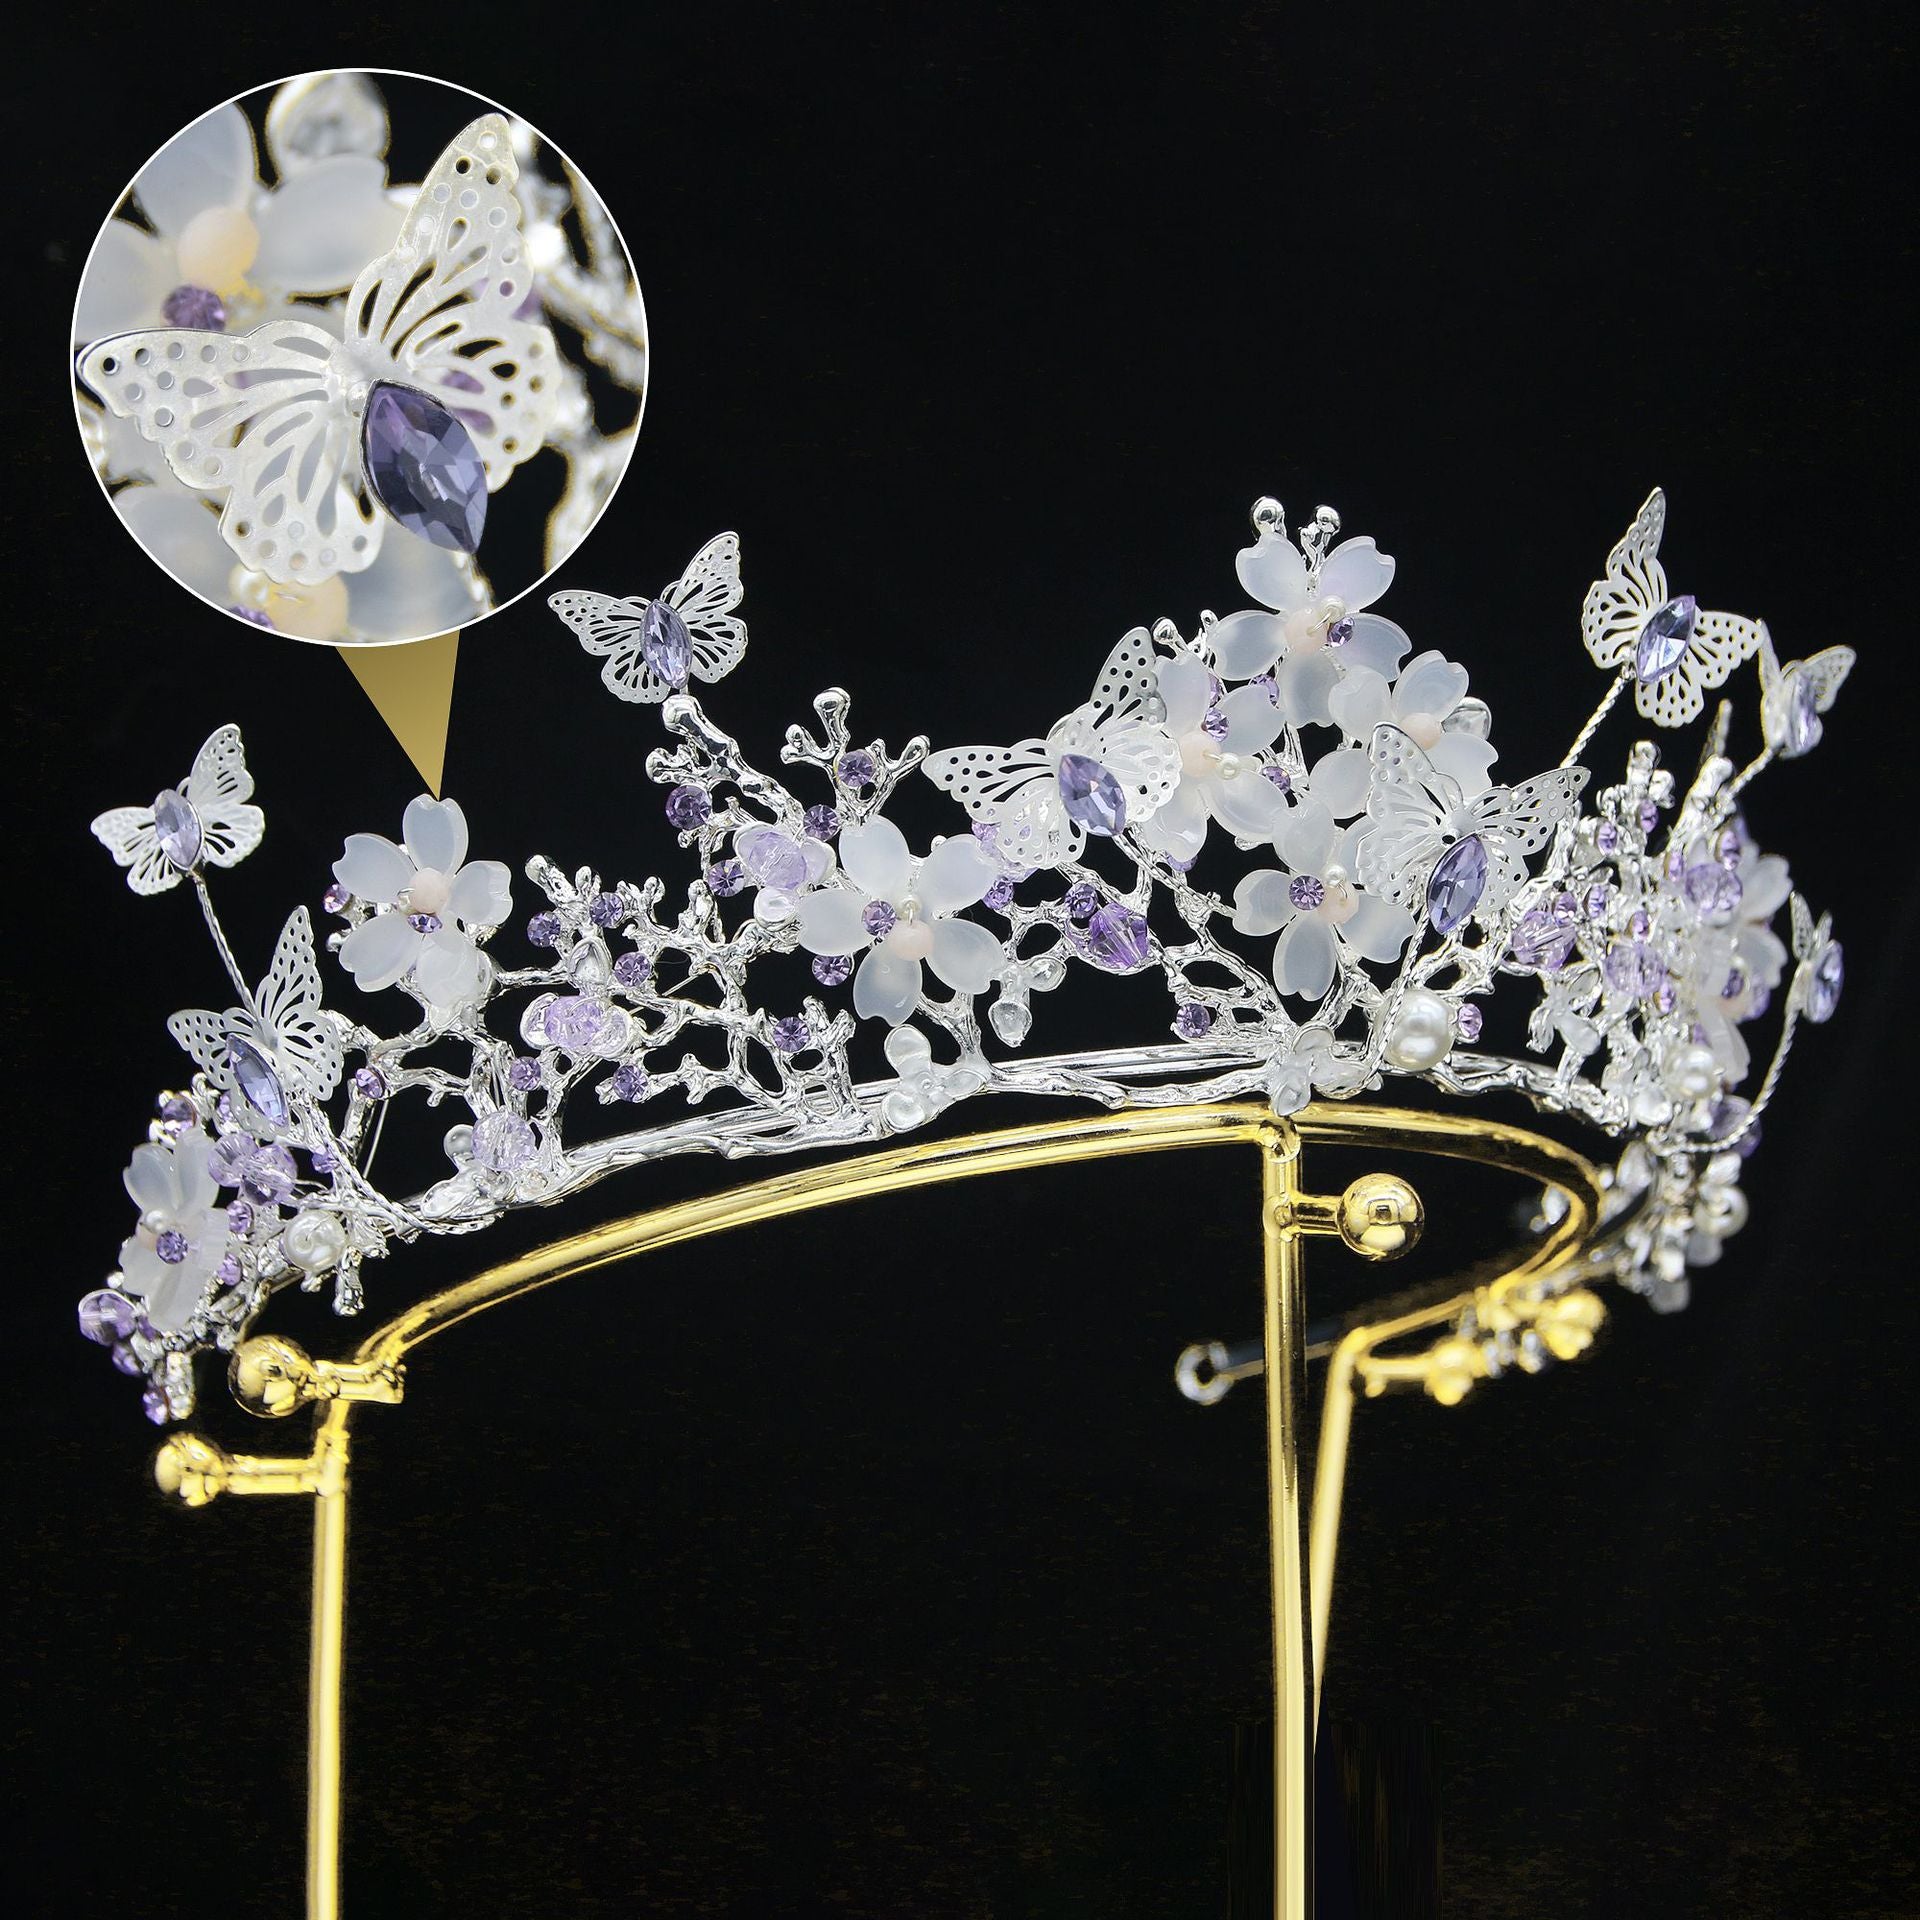 Exquisite and Elegant Headdress for Formal Occasions - Crown Headpiece for Parties and Special Events